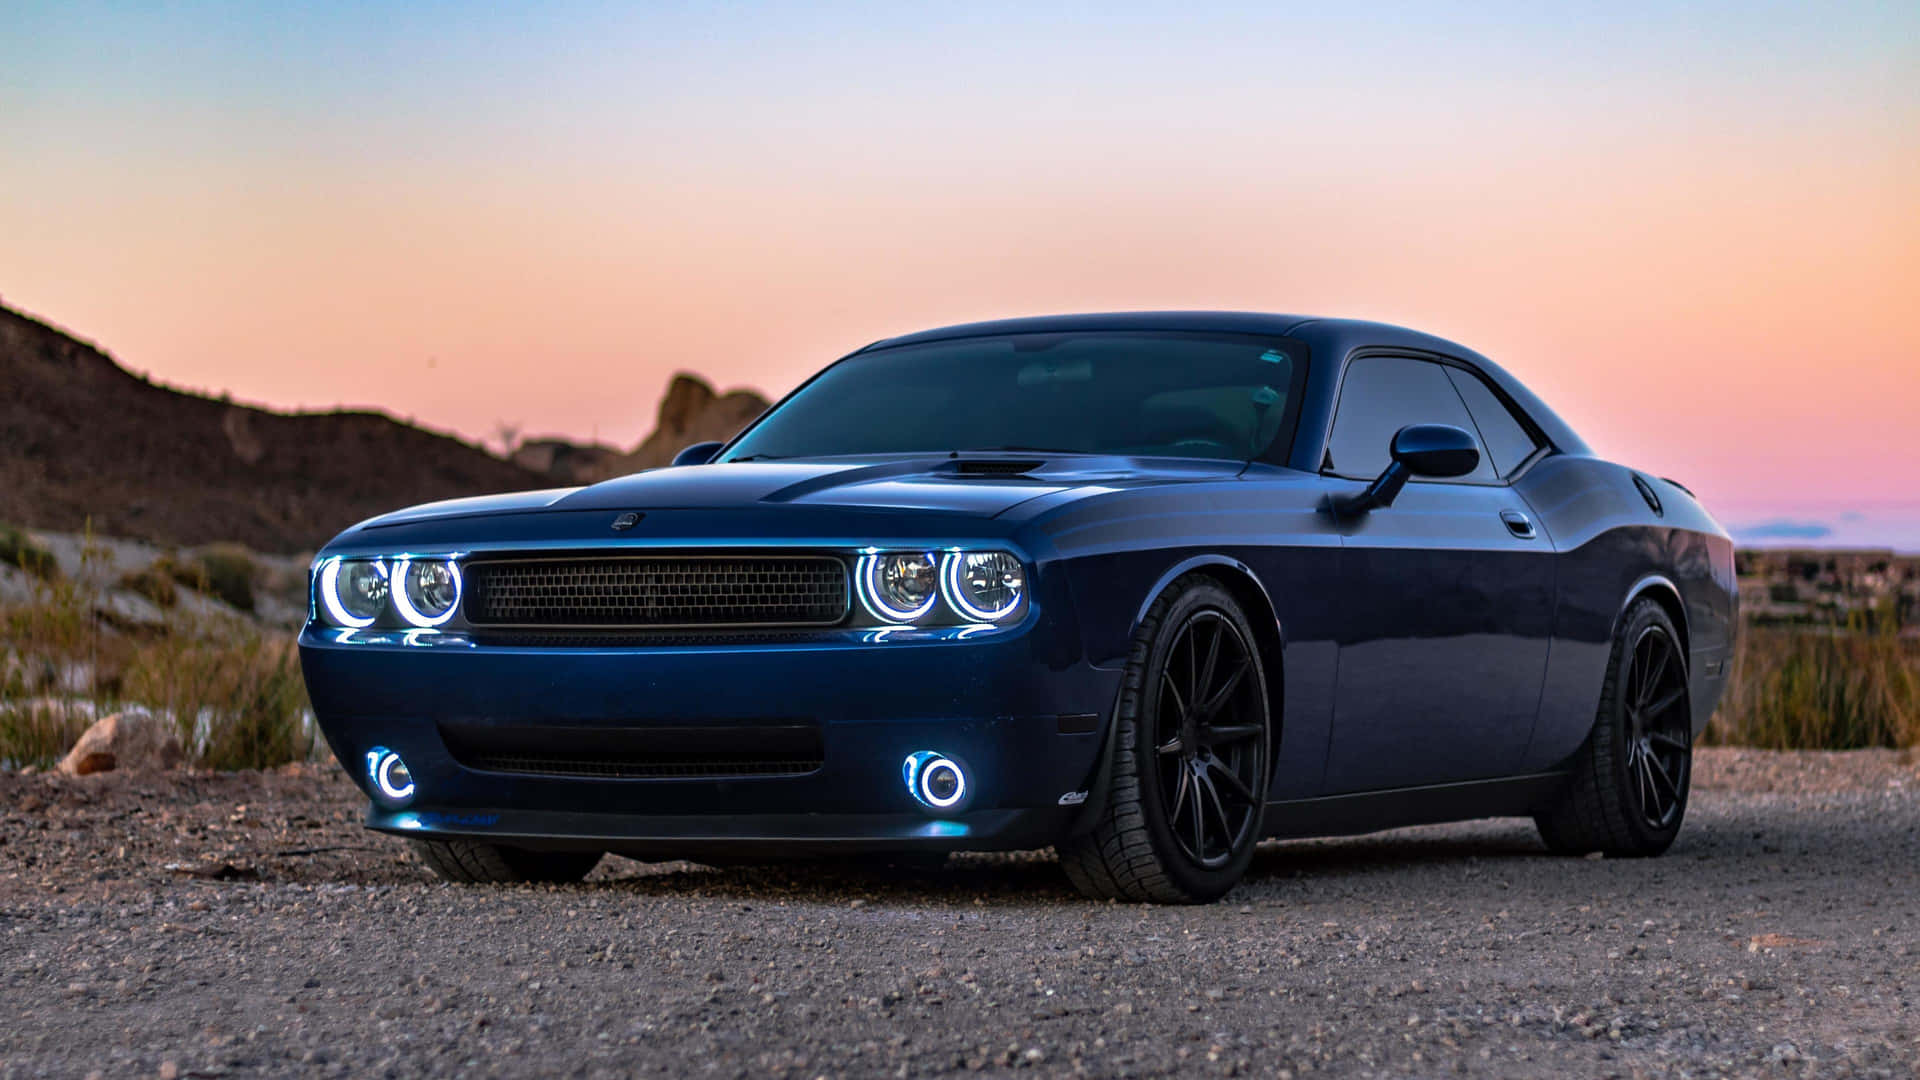 Classic American Muscle: The Dodge Challenger Wallpaper